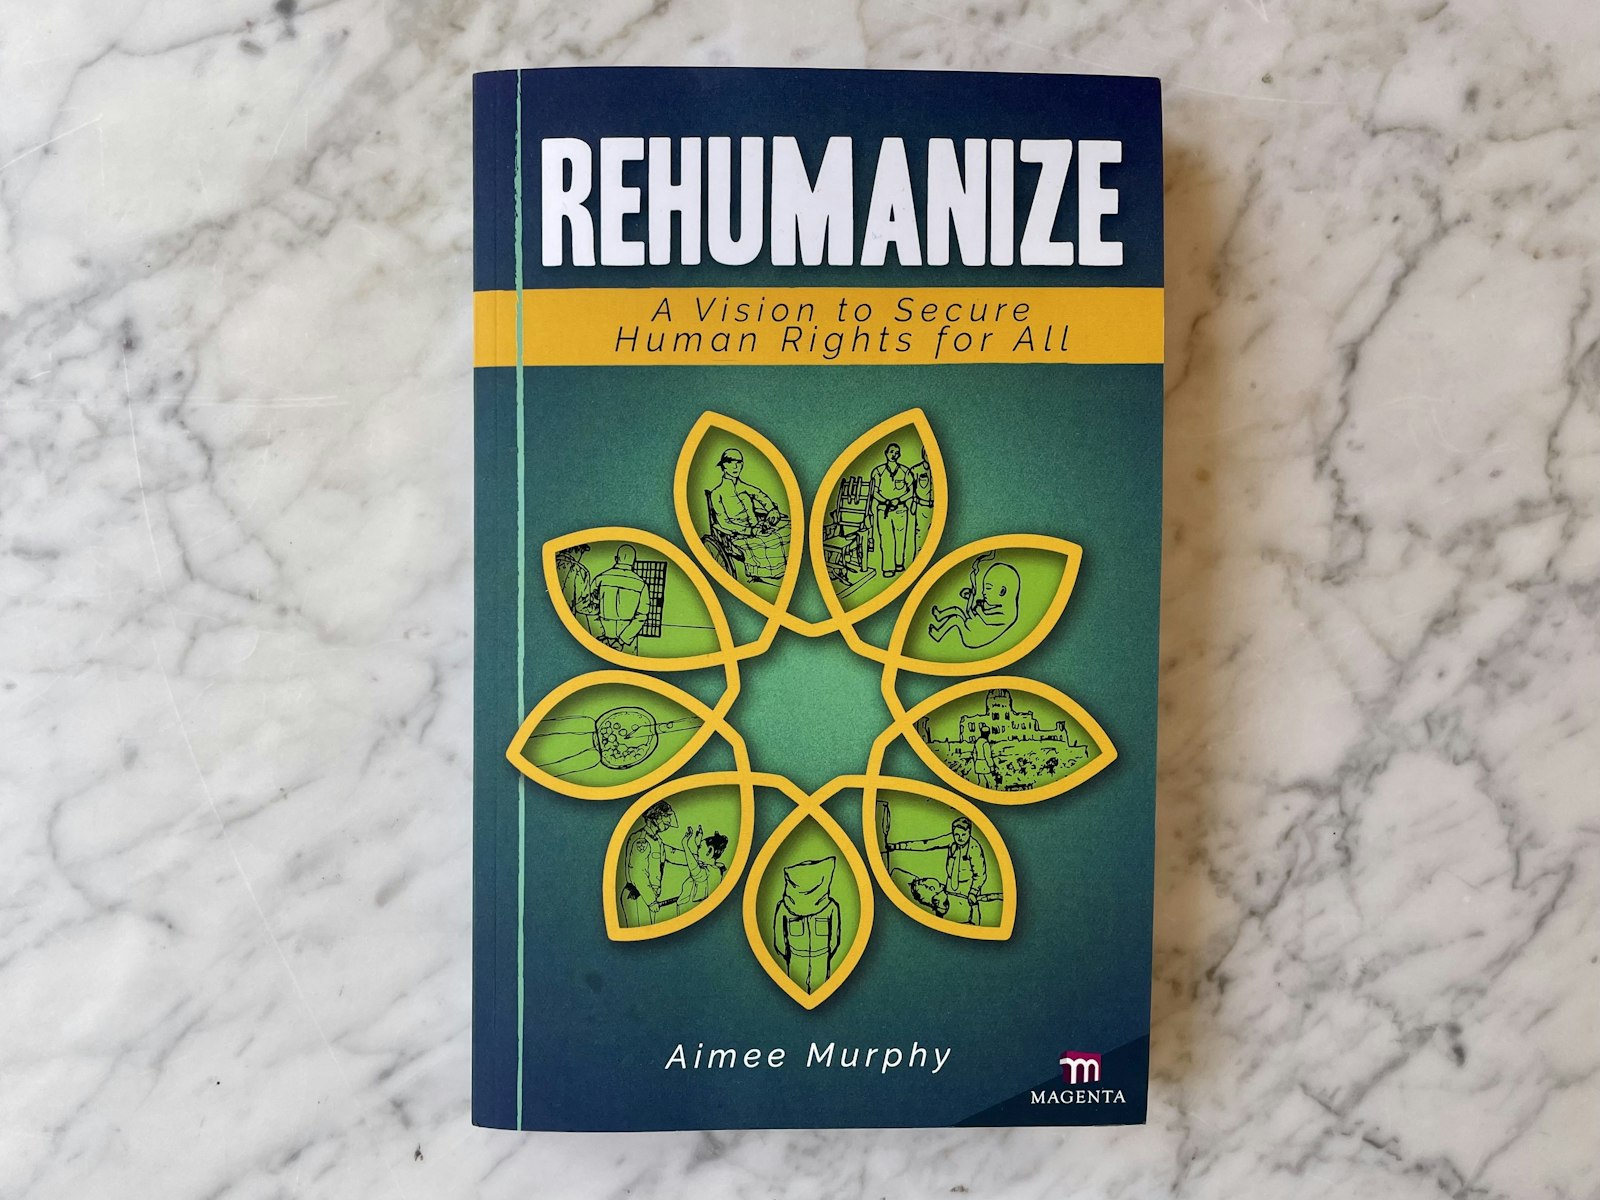 In her book, Murphy invites readers to face head-on how polarized our culture has become on issues of life and the lack of consistency across the board. Murphy breaks down pertinent Consistent Life Ethic issues chapter by chapter, and gives readers meaningful steps to take action and truly live by a consistent life ethic.